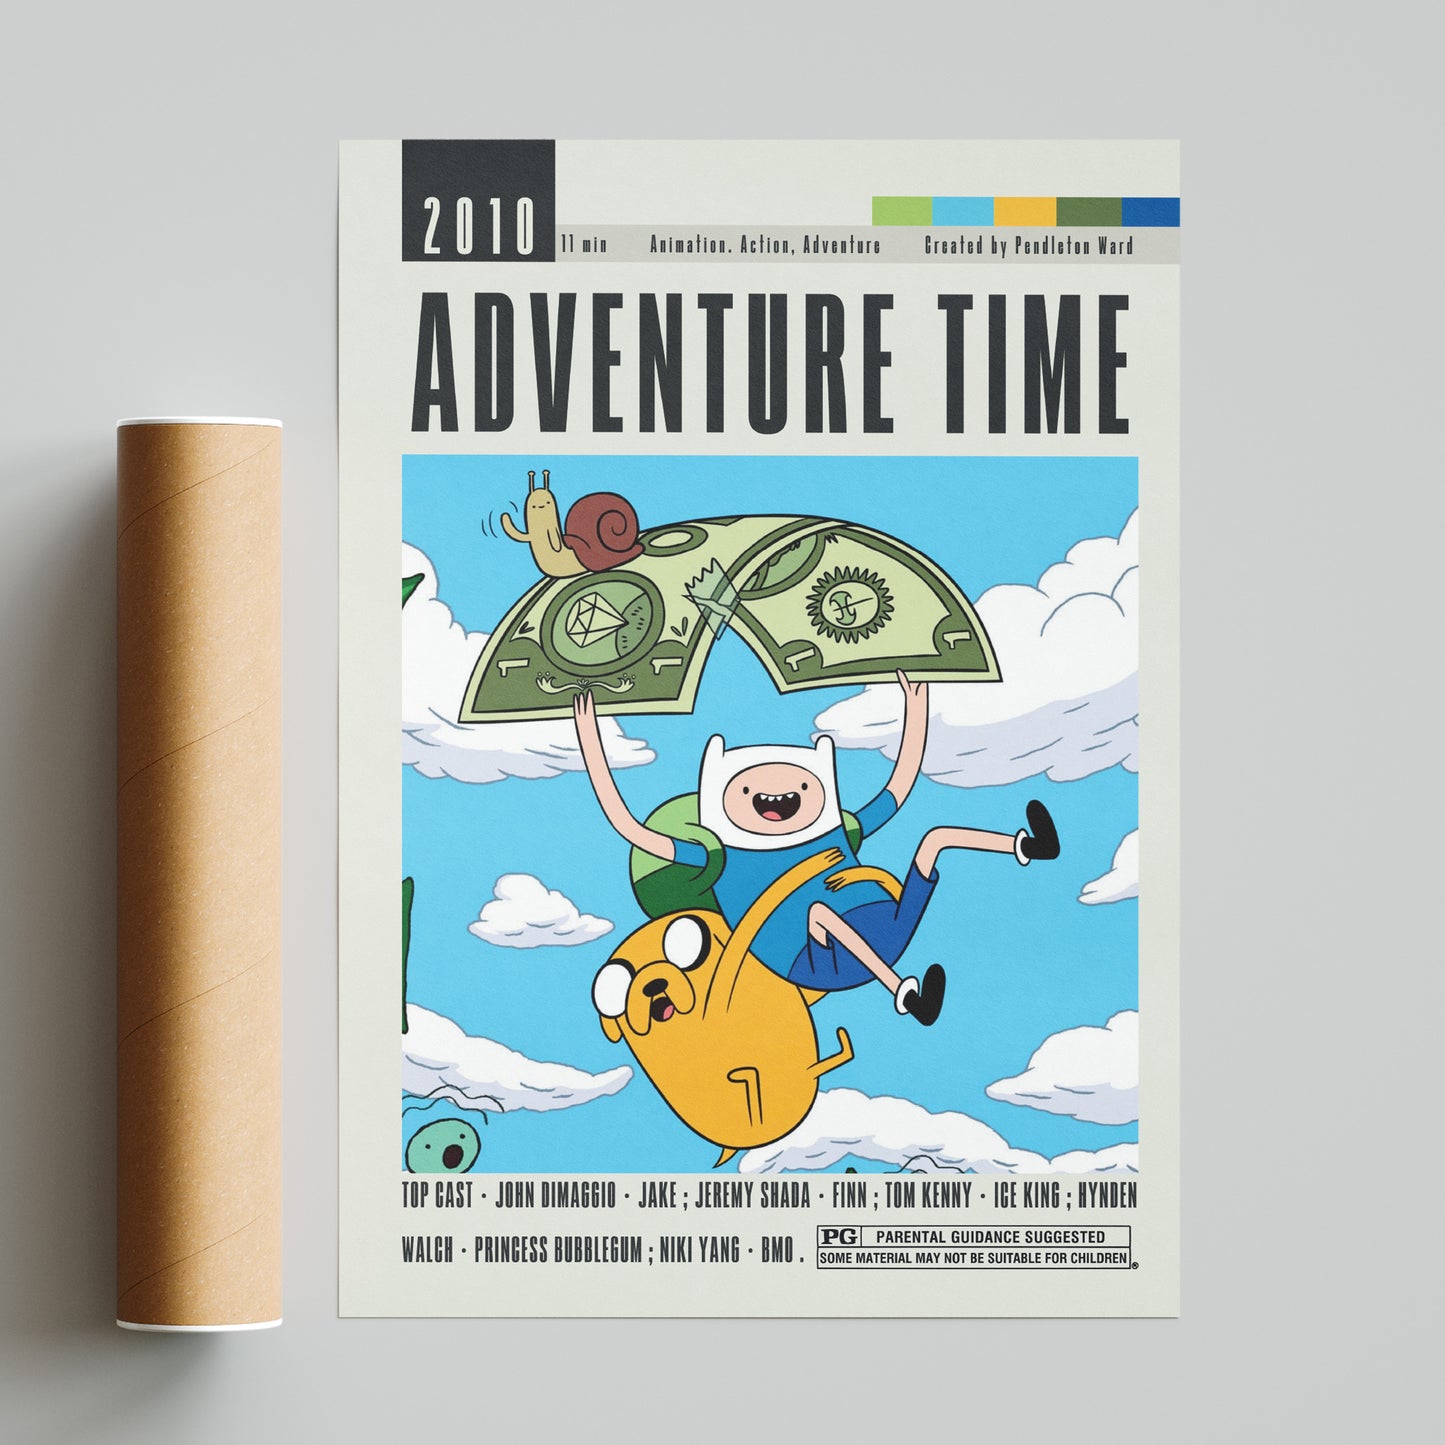 Discover the best movies of all time with our Adventure Time Poster featuring 98 unique and custom designed movie posters. From minimalist to vintage retro art, these wall art prints will add a touch of nostalgia to any space. Available in sizes from A6 to A3, each print highlights the top cast members, director and most famous scene to bring the magic of the movie to life.